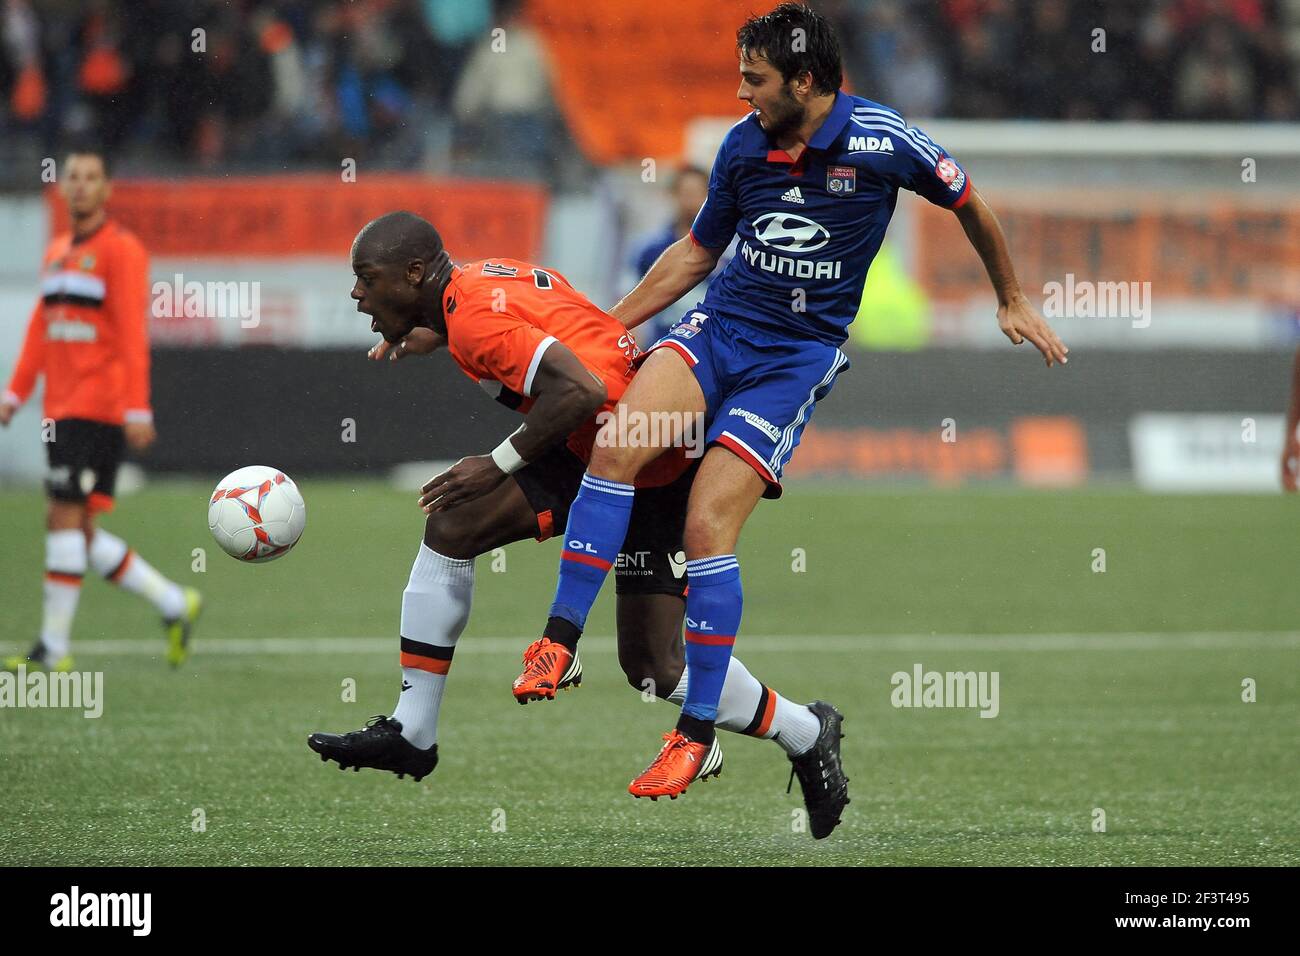 FOOTBALL - FRENCH CHAMPIONSHIP 2012/2013 - L1 - FC LORIENT v OLYMPIQUE LYONNAIS - 7/10/2012 - PHOTO PASCAL ALLEE / DPPI - LAMINE KONE (FCL) / CLEMENT GRENIER Stock Photo